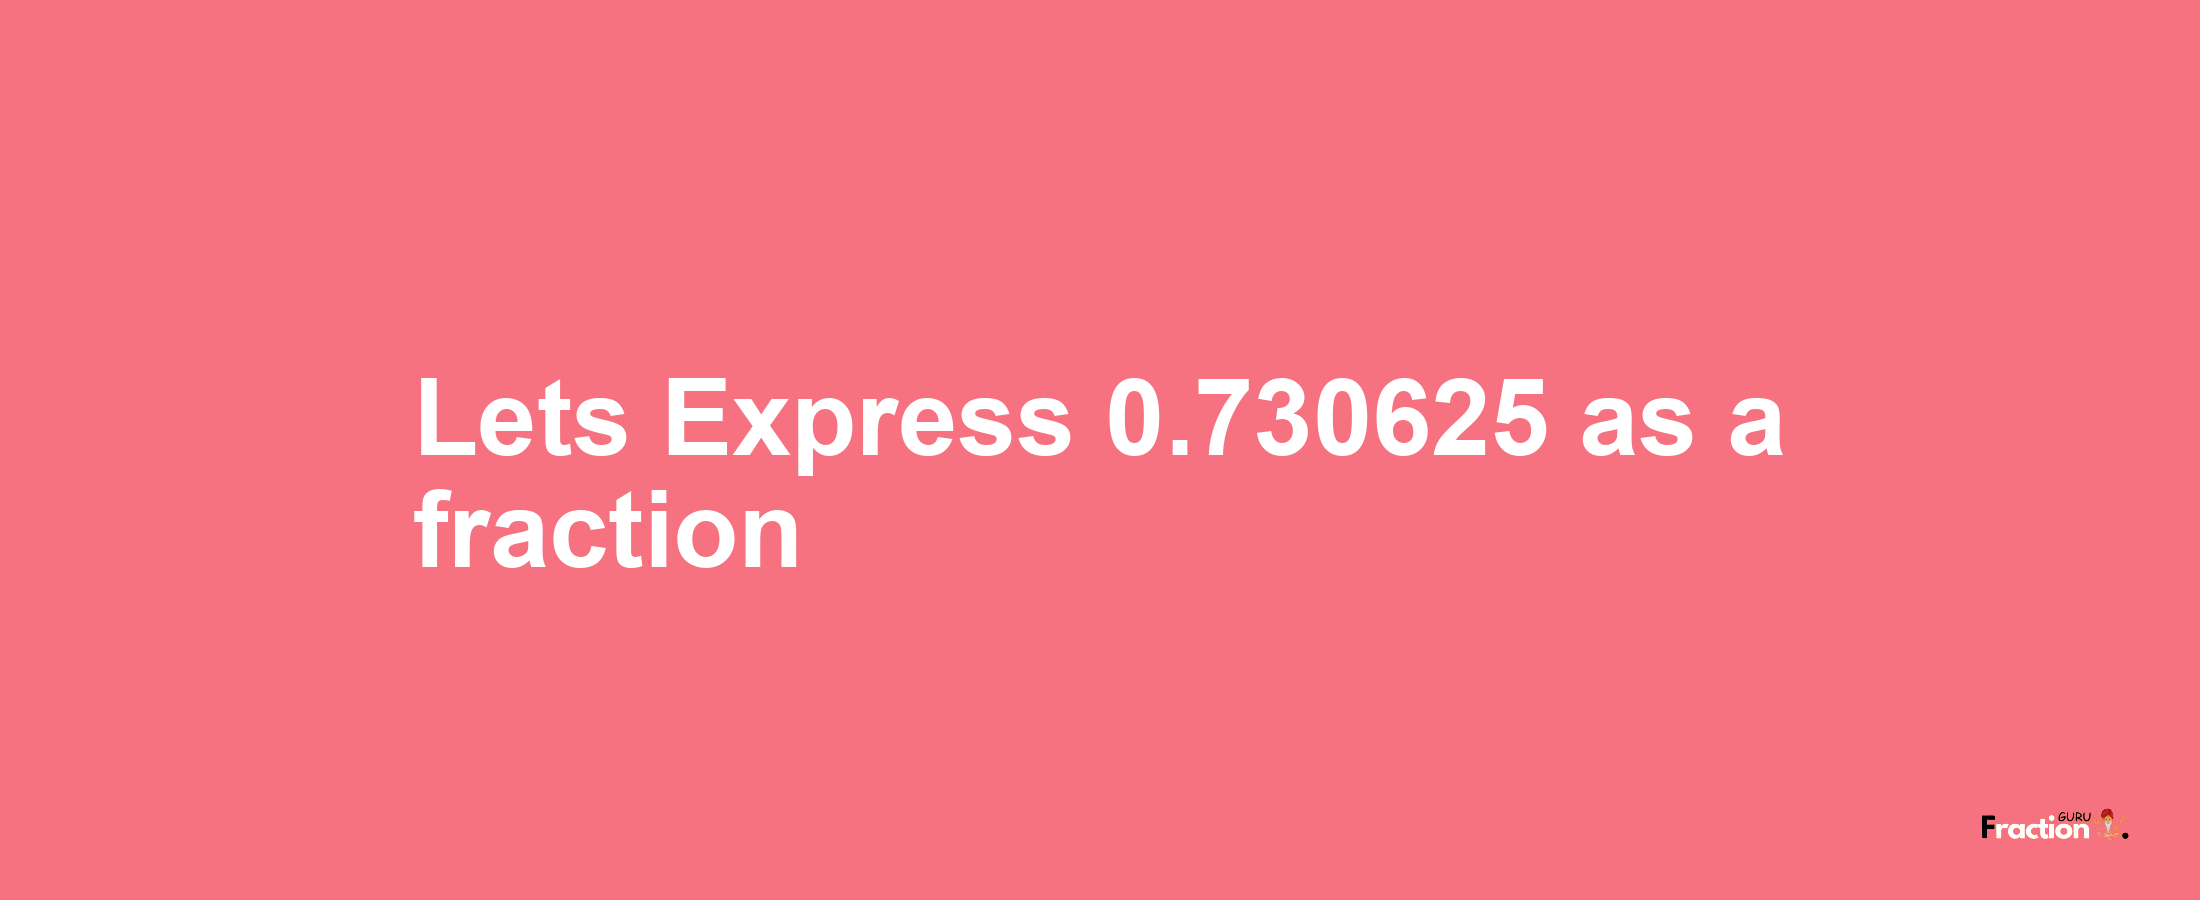 Lets Express 0.730625 as afraction